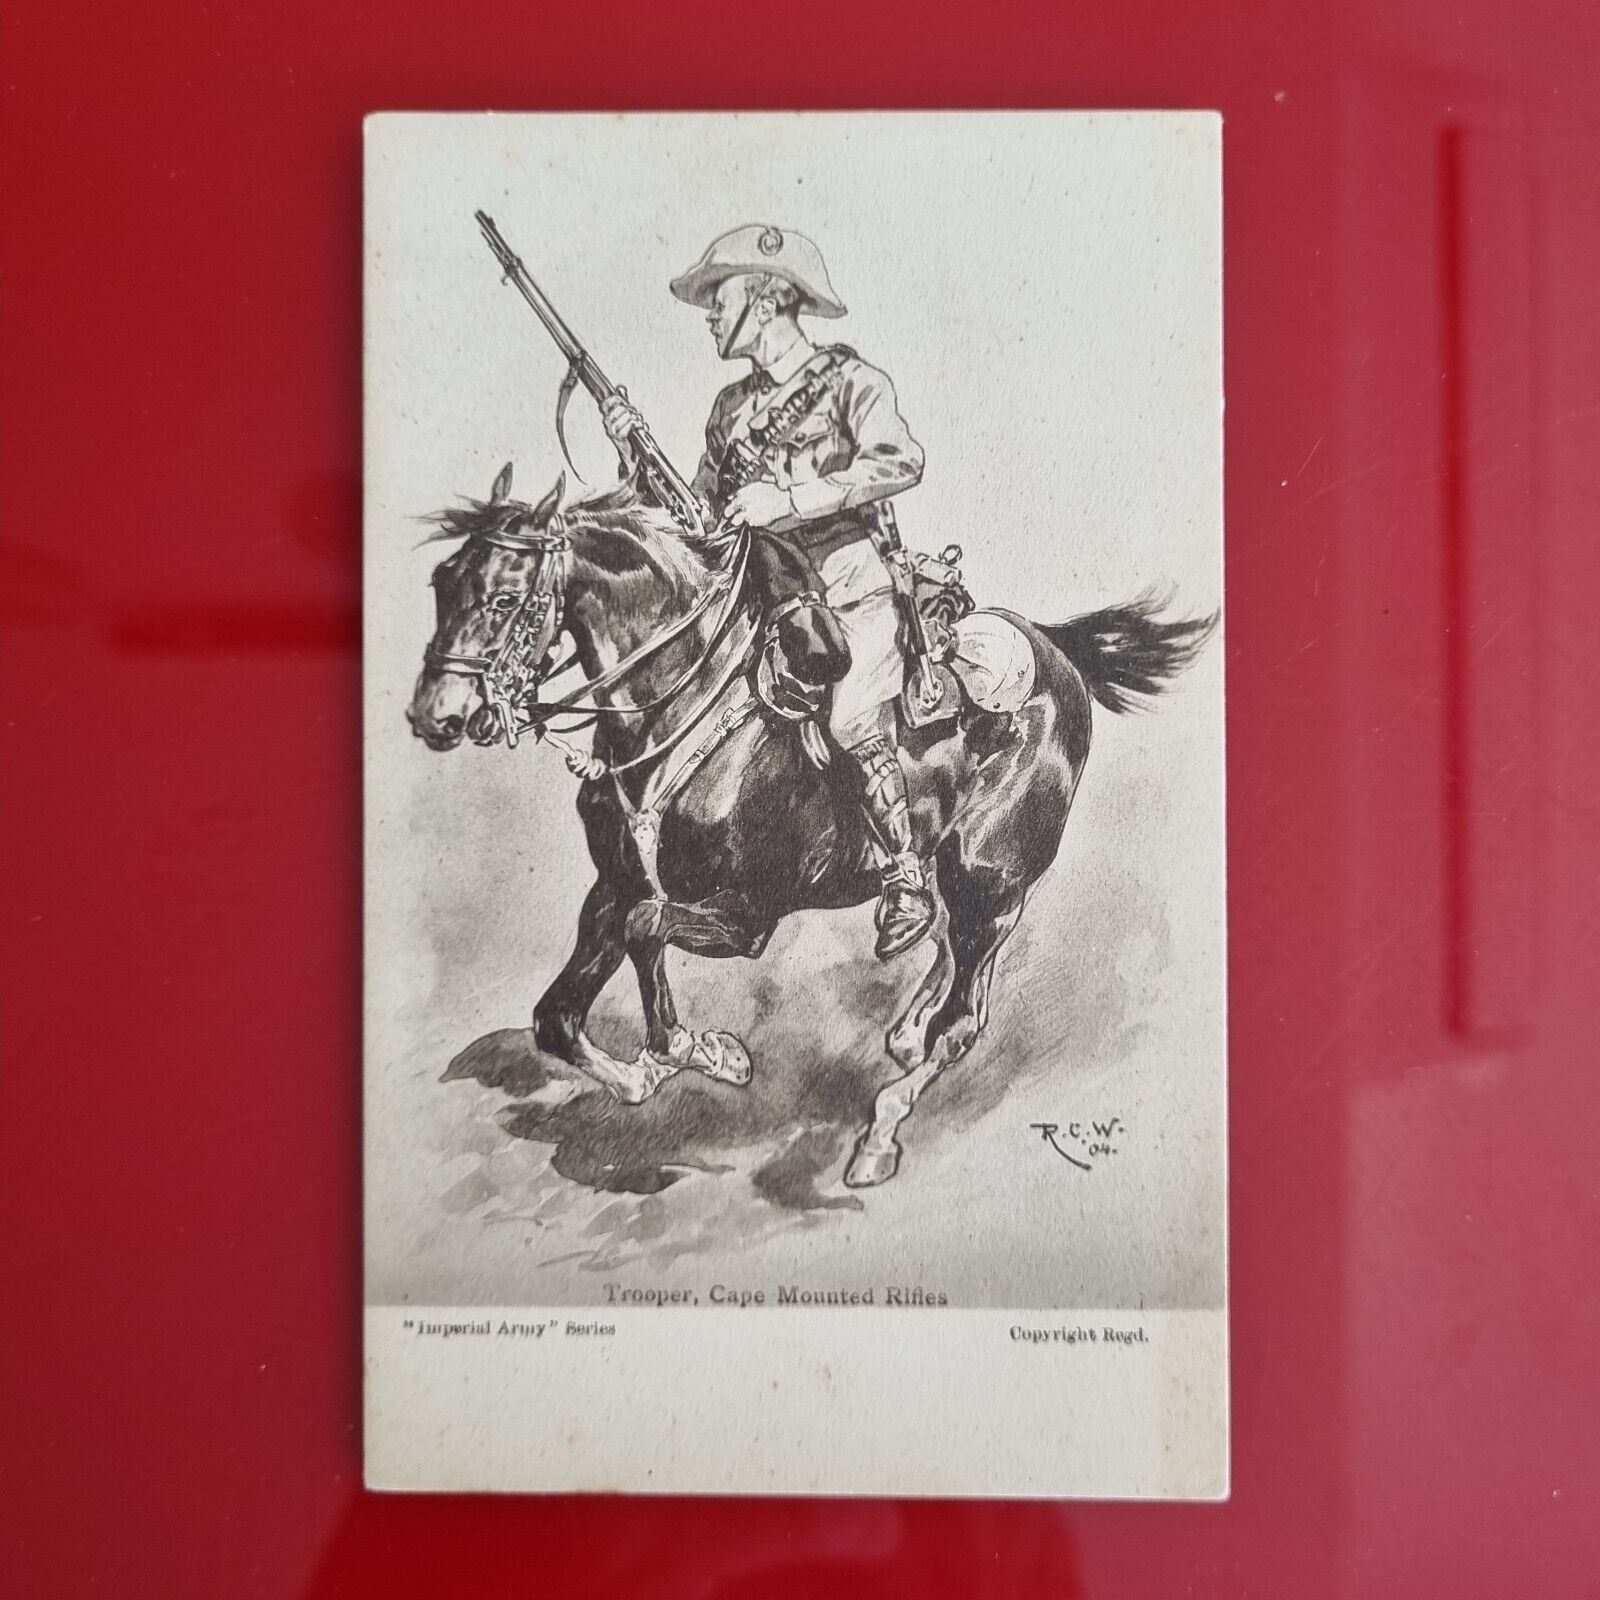 CPA - ART - DRAWING - TROOPER, CAPE MOUNTED RIFLES, \